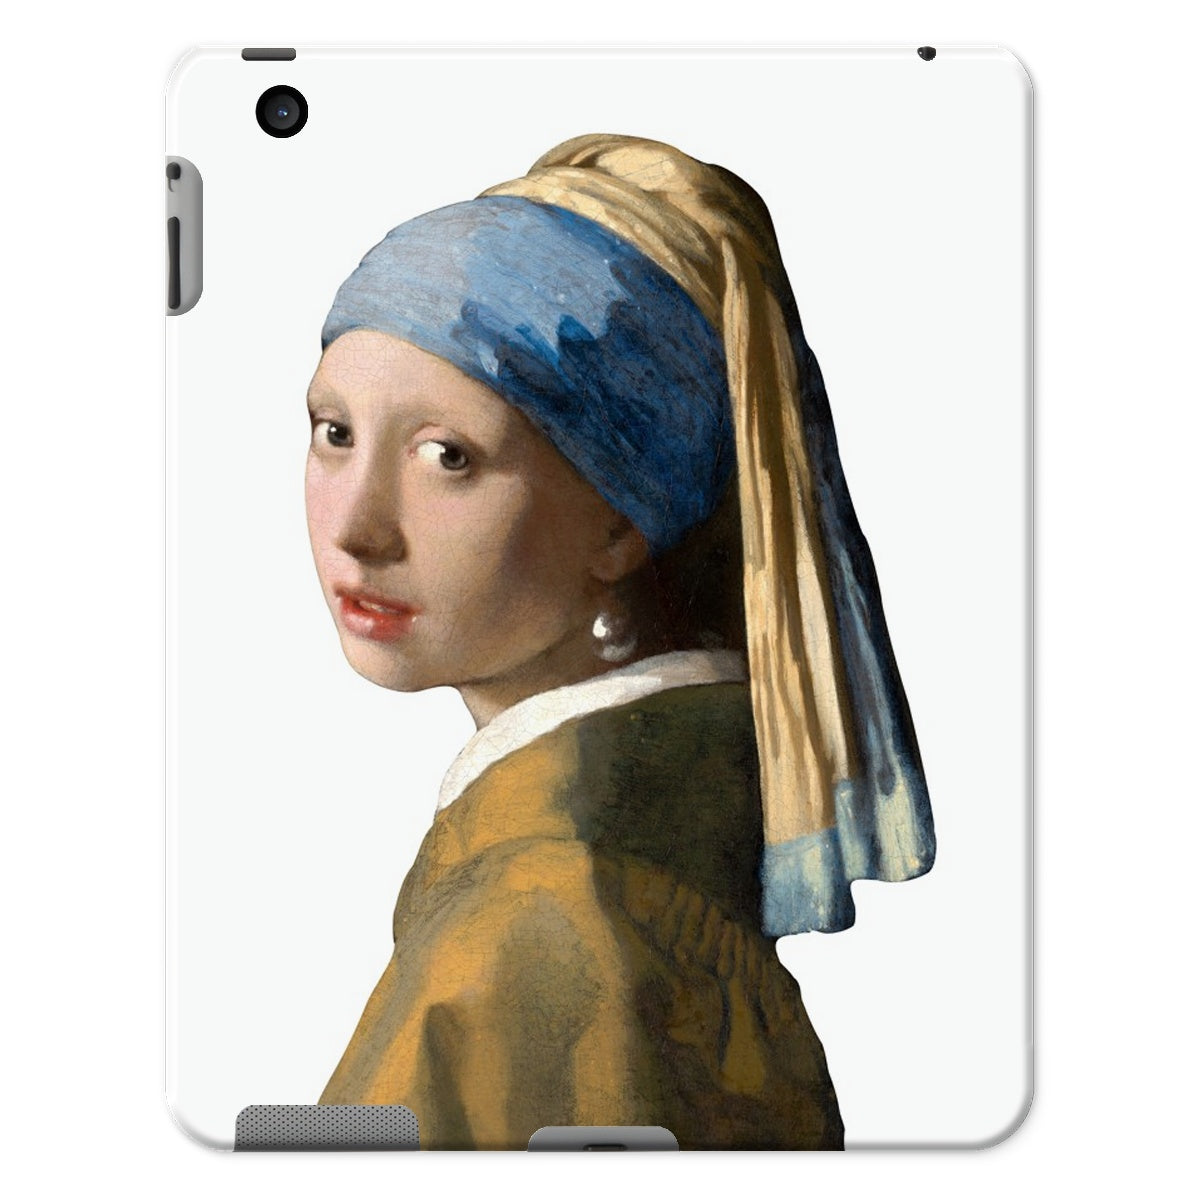 Vermeer - Girl with a Pearl Earring Tablet-Hülle - Atopurinto